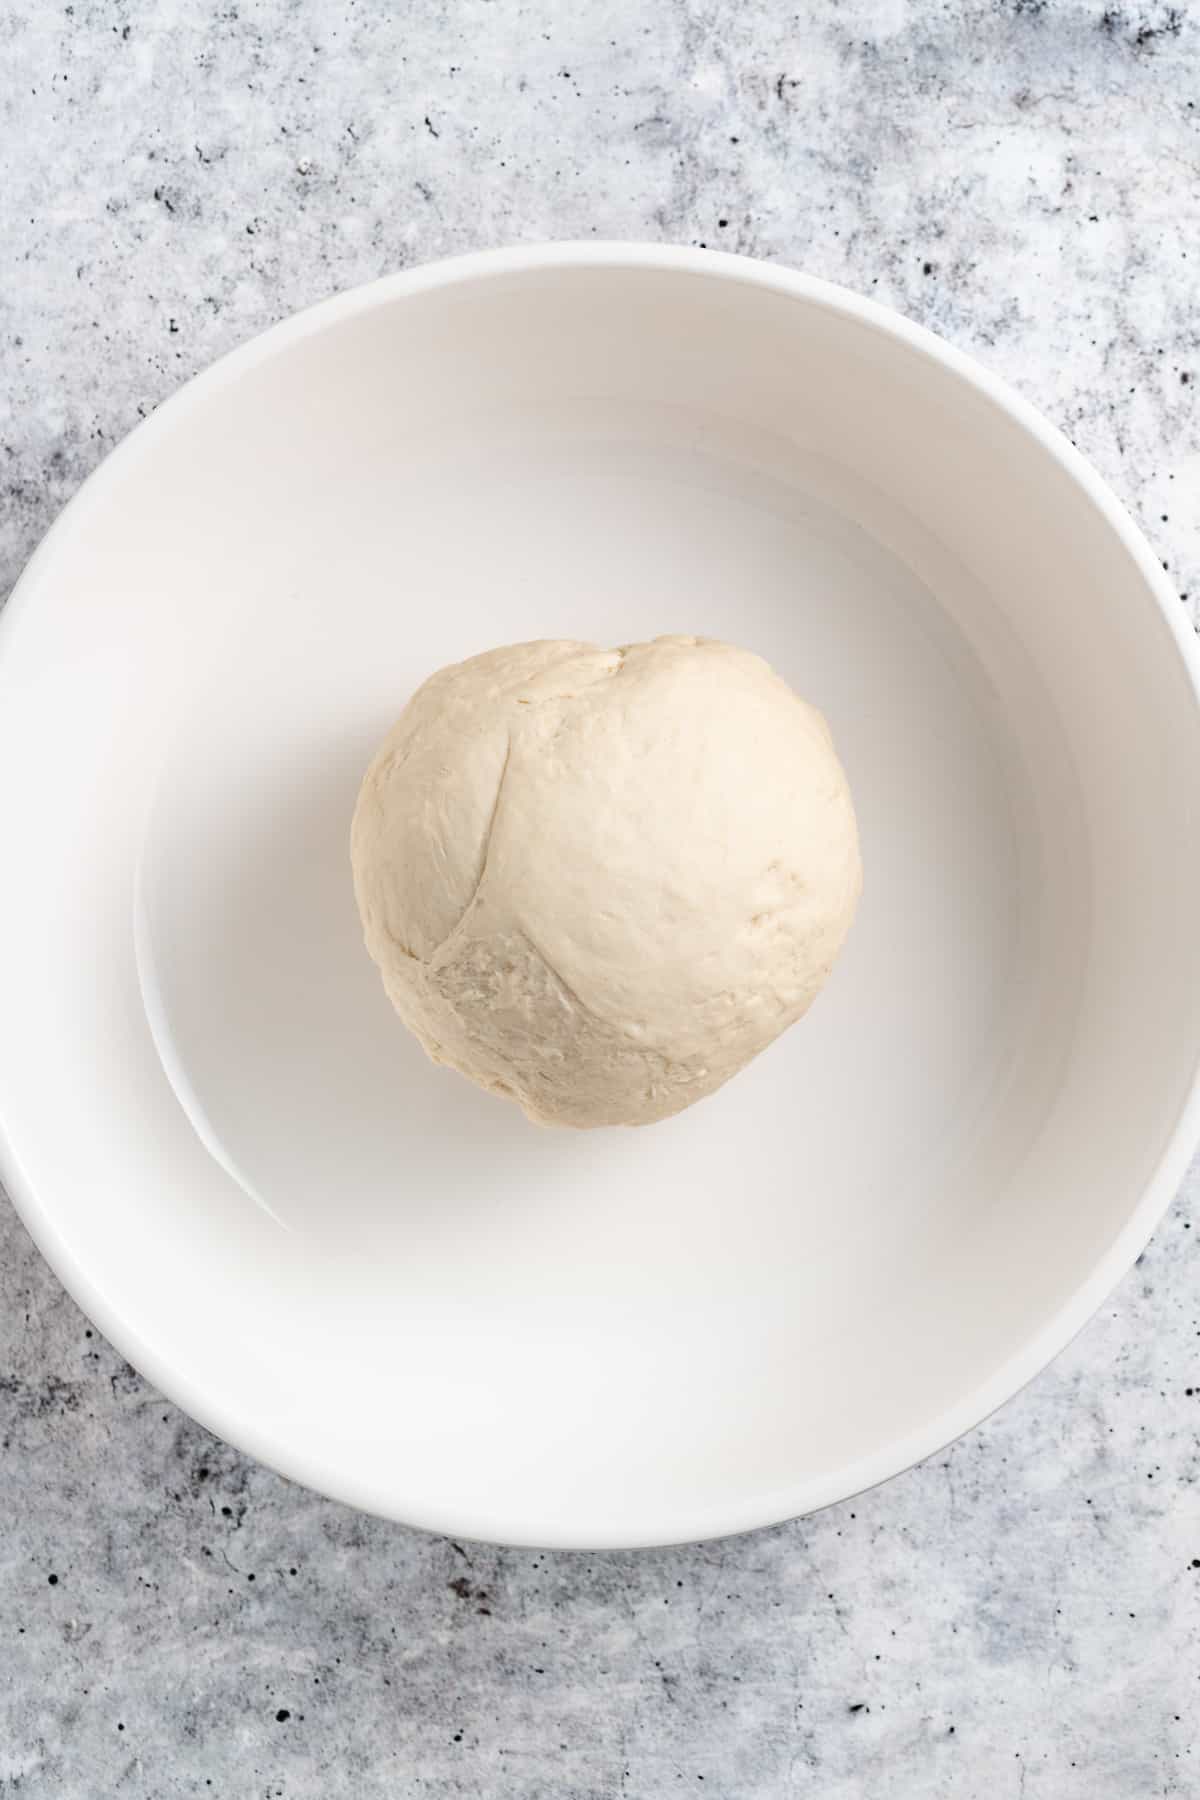 Rolling the dough into a ball.